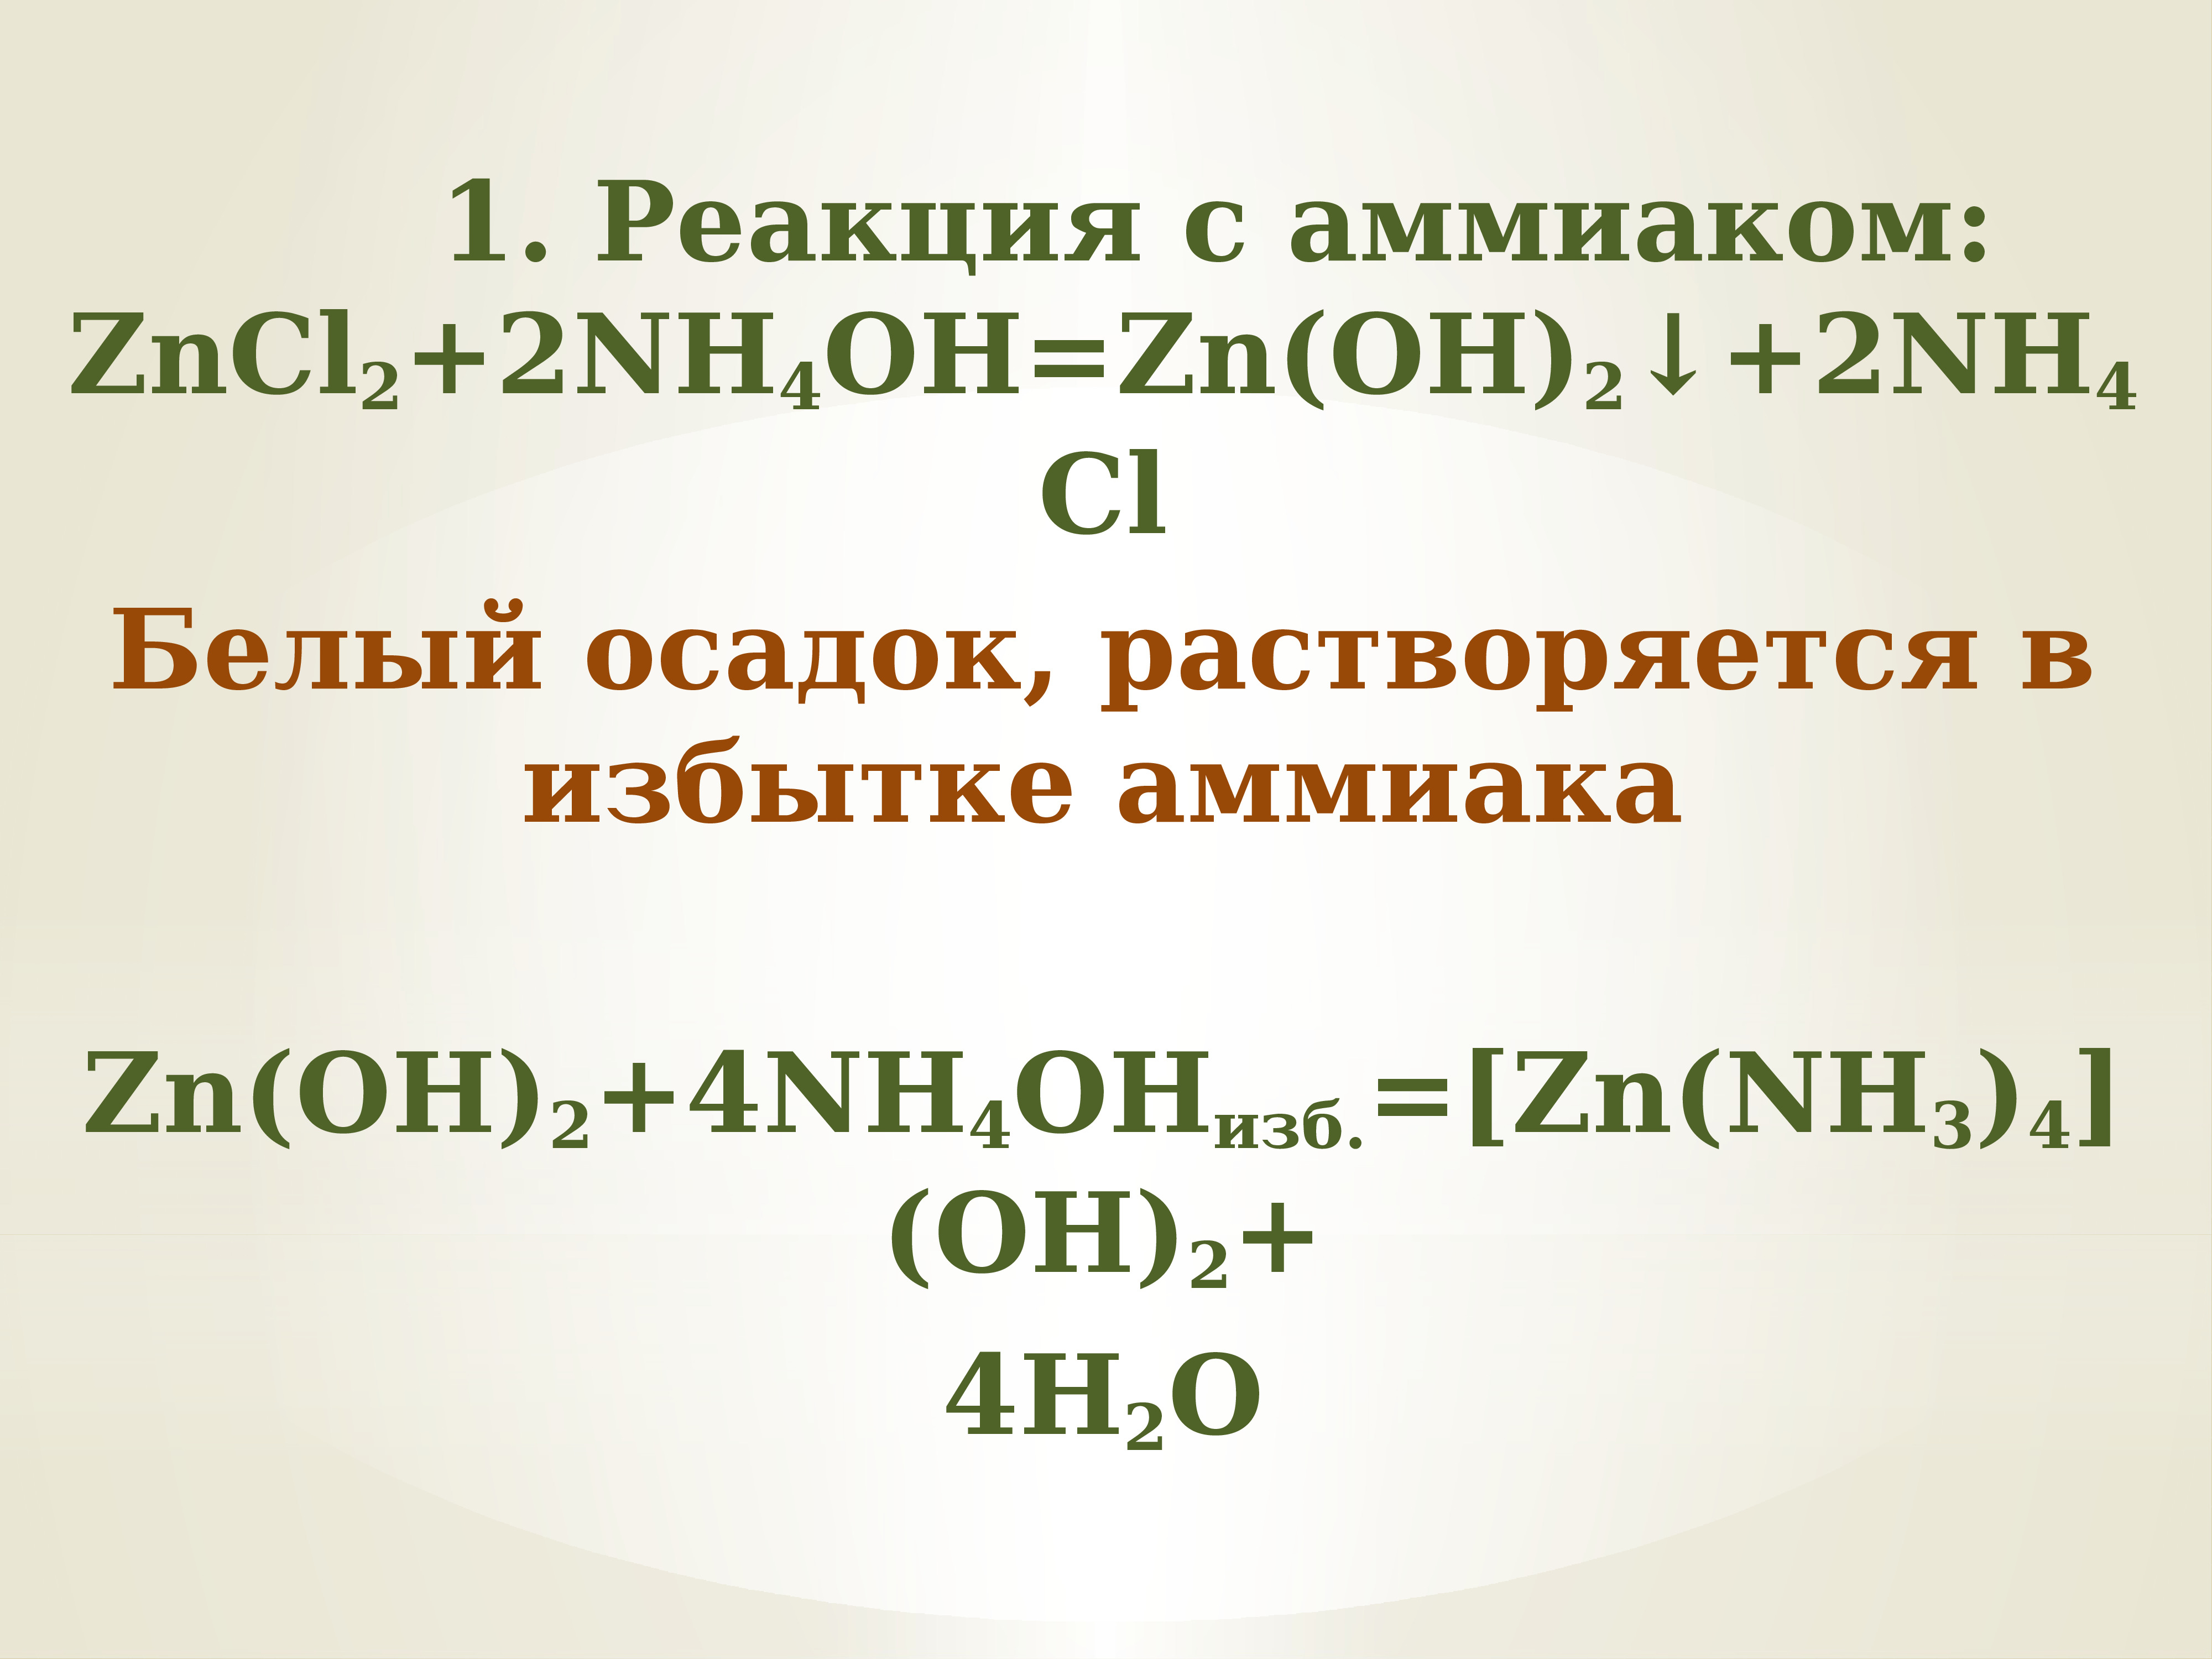 Nh4cl zn. Zncl2 nh3 h2o. ZN Oh 2 nh4oh. Zncl2 nh4oh. [ZN(nh3)4](Oh)2.